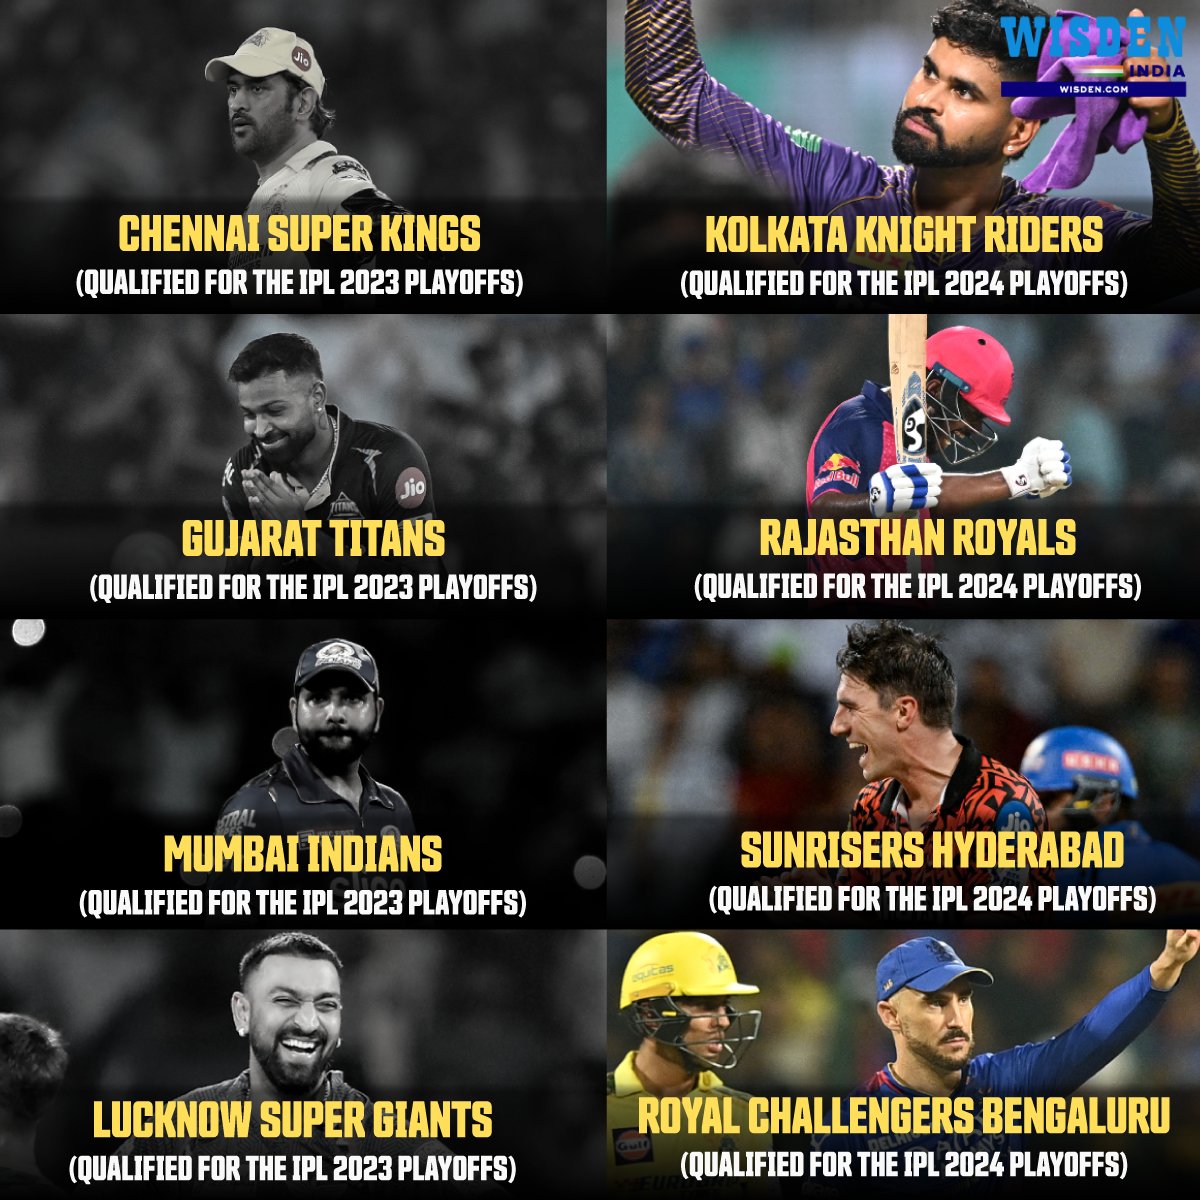 IPL 2023: CSK, GT, MI, and LSG. IPL 2024: KKR, RR, SRH, and RCB. For the first time ever, the playoff teams in consecutive IPL seasons are completely different 😵 #KKR #RR #SRH #RCB #IPL2024 #Cricket #RCBvsCSK #IPLPlayoffs